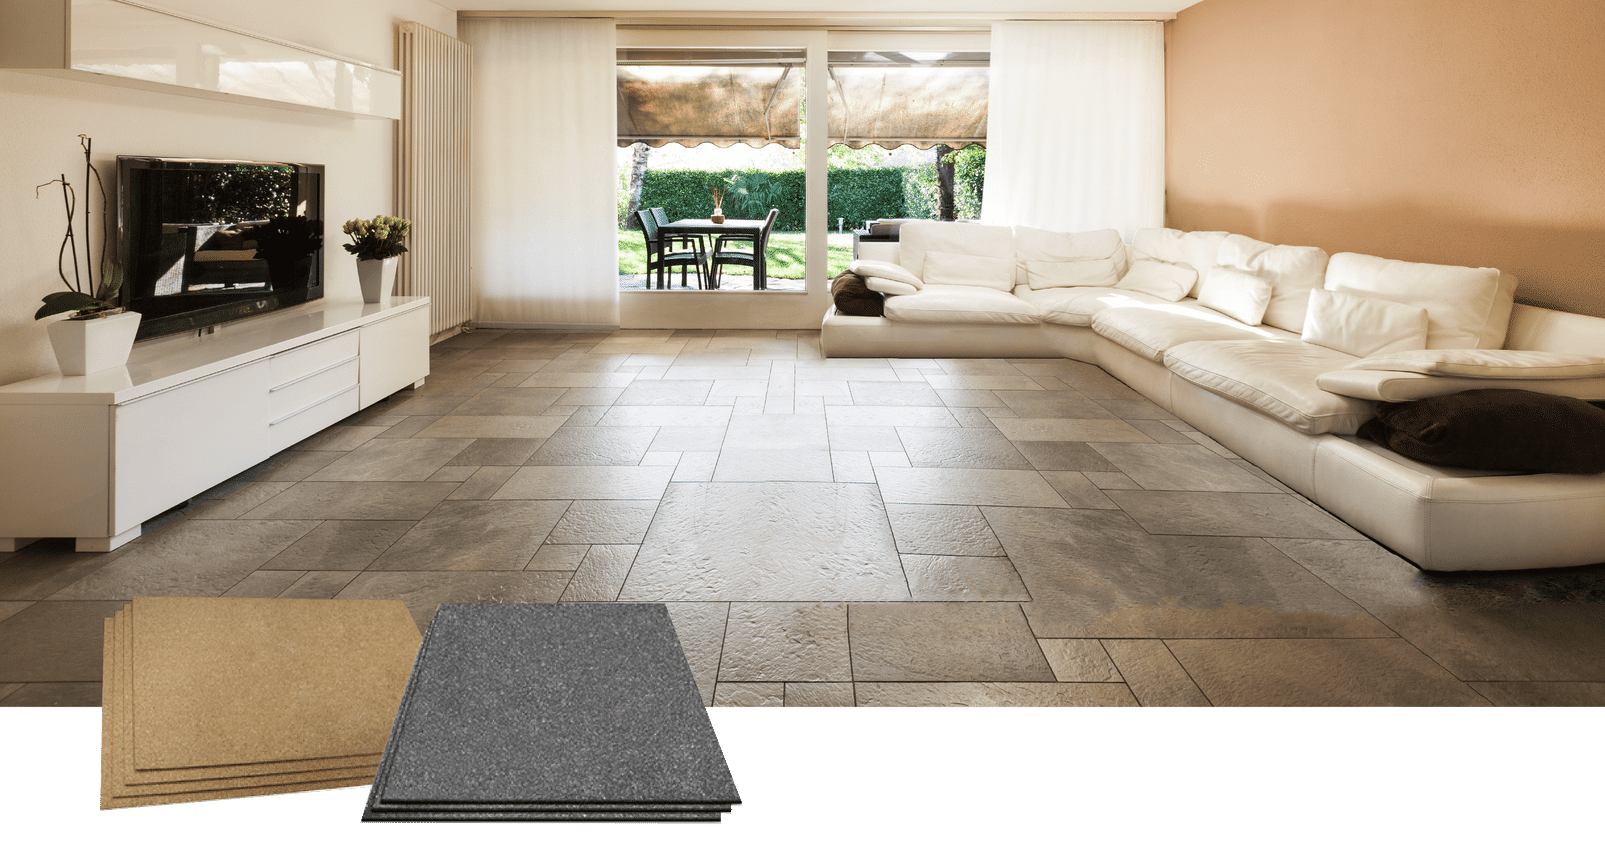 Underlayment Options For Radiant Floor Heating Systems